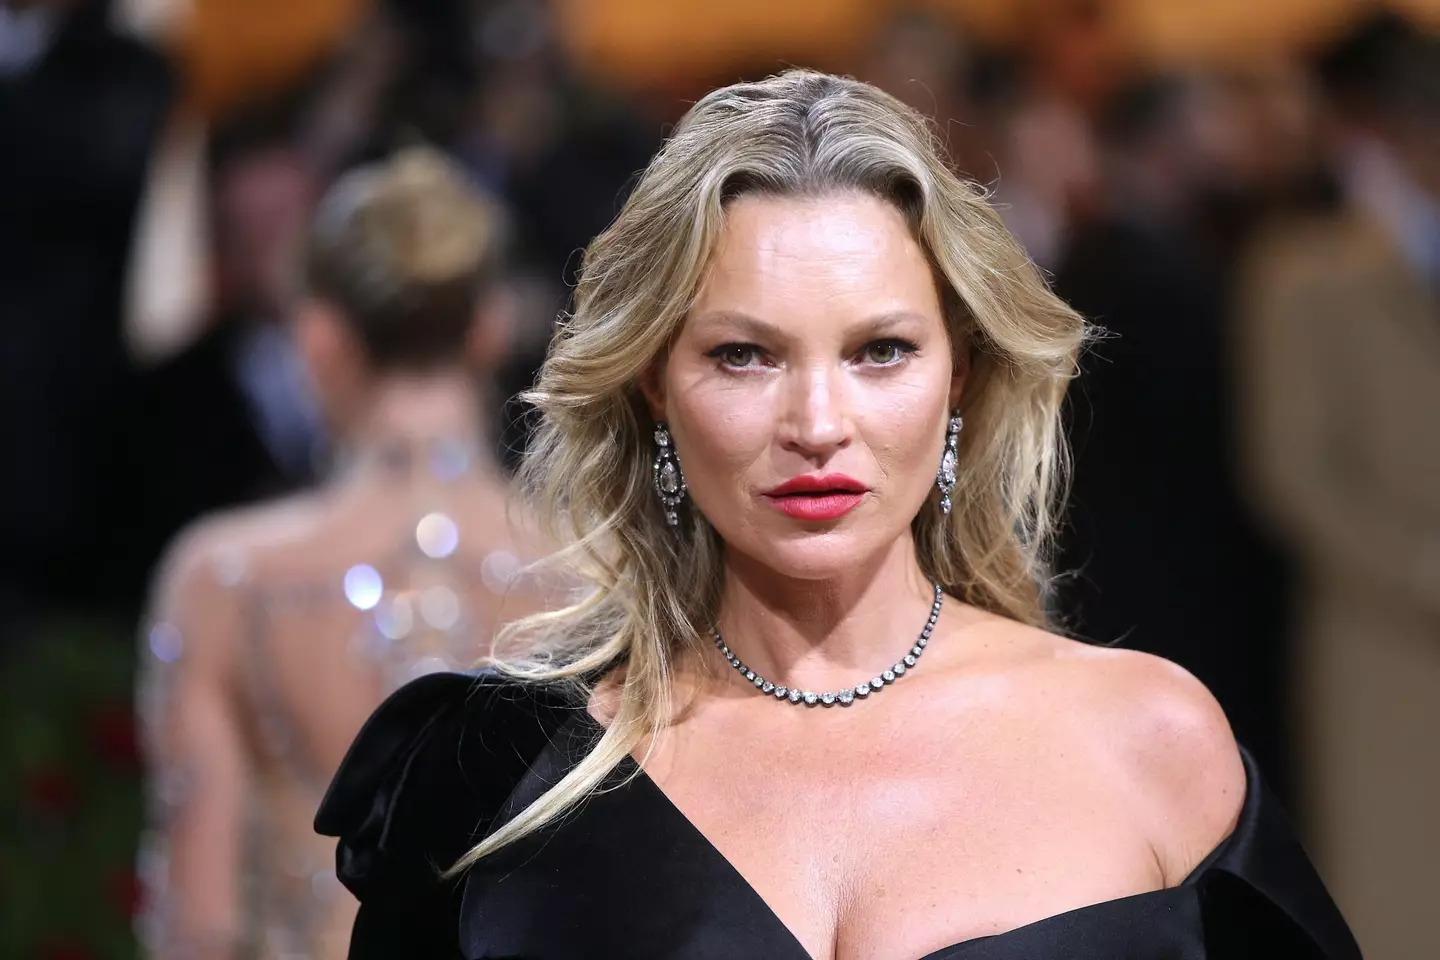 Kate Moss has spoken out about her 1992 Calvin Klein photoshoot.